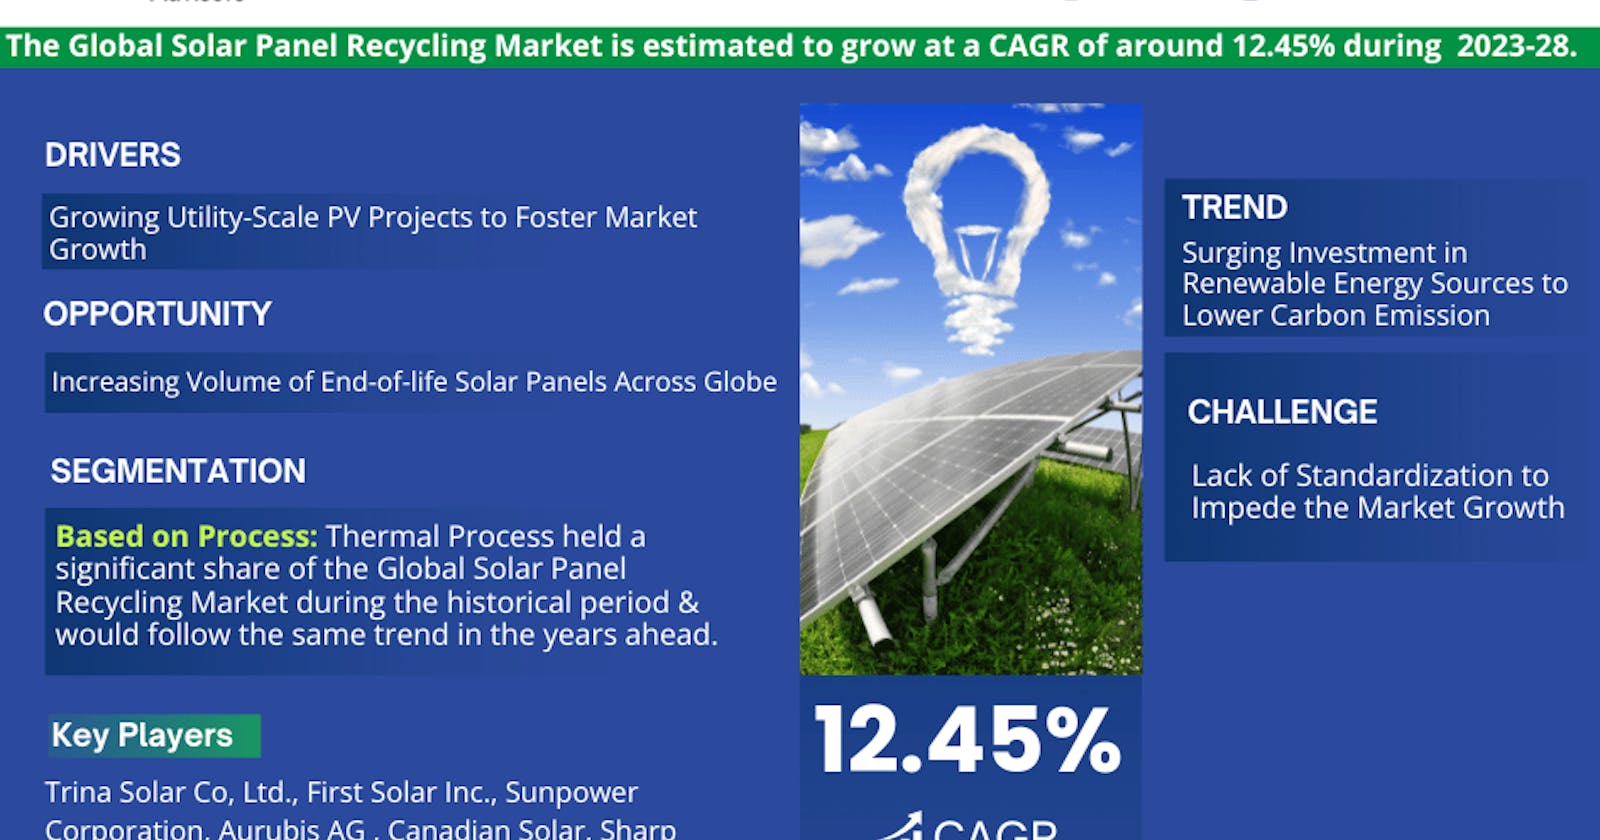 Solar Panel Recycling Market Anticipates Robust 12.45% CAGR for 2023-28